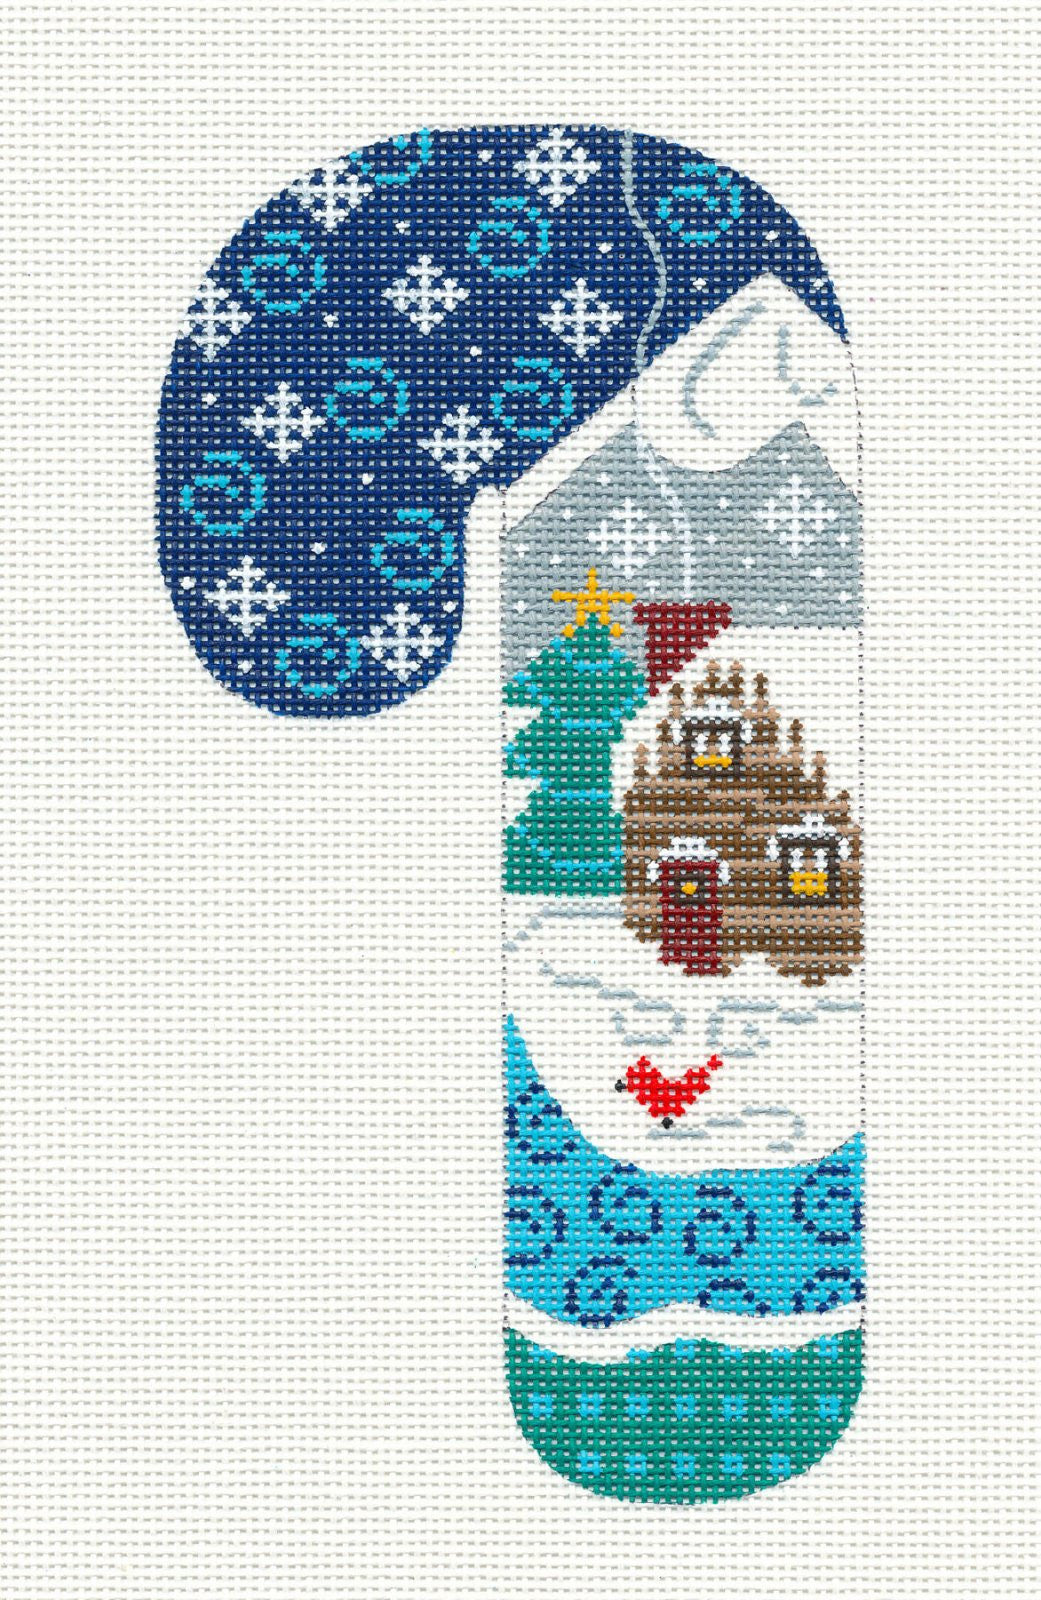 Candy Cane ~ Log Cabin With Snowflakes LG. Ornament handpainted Needlepoint Canvas by Danji Designs